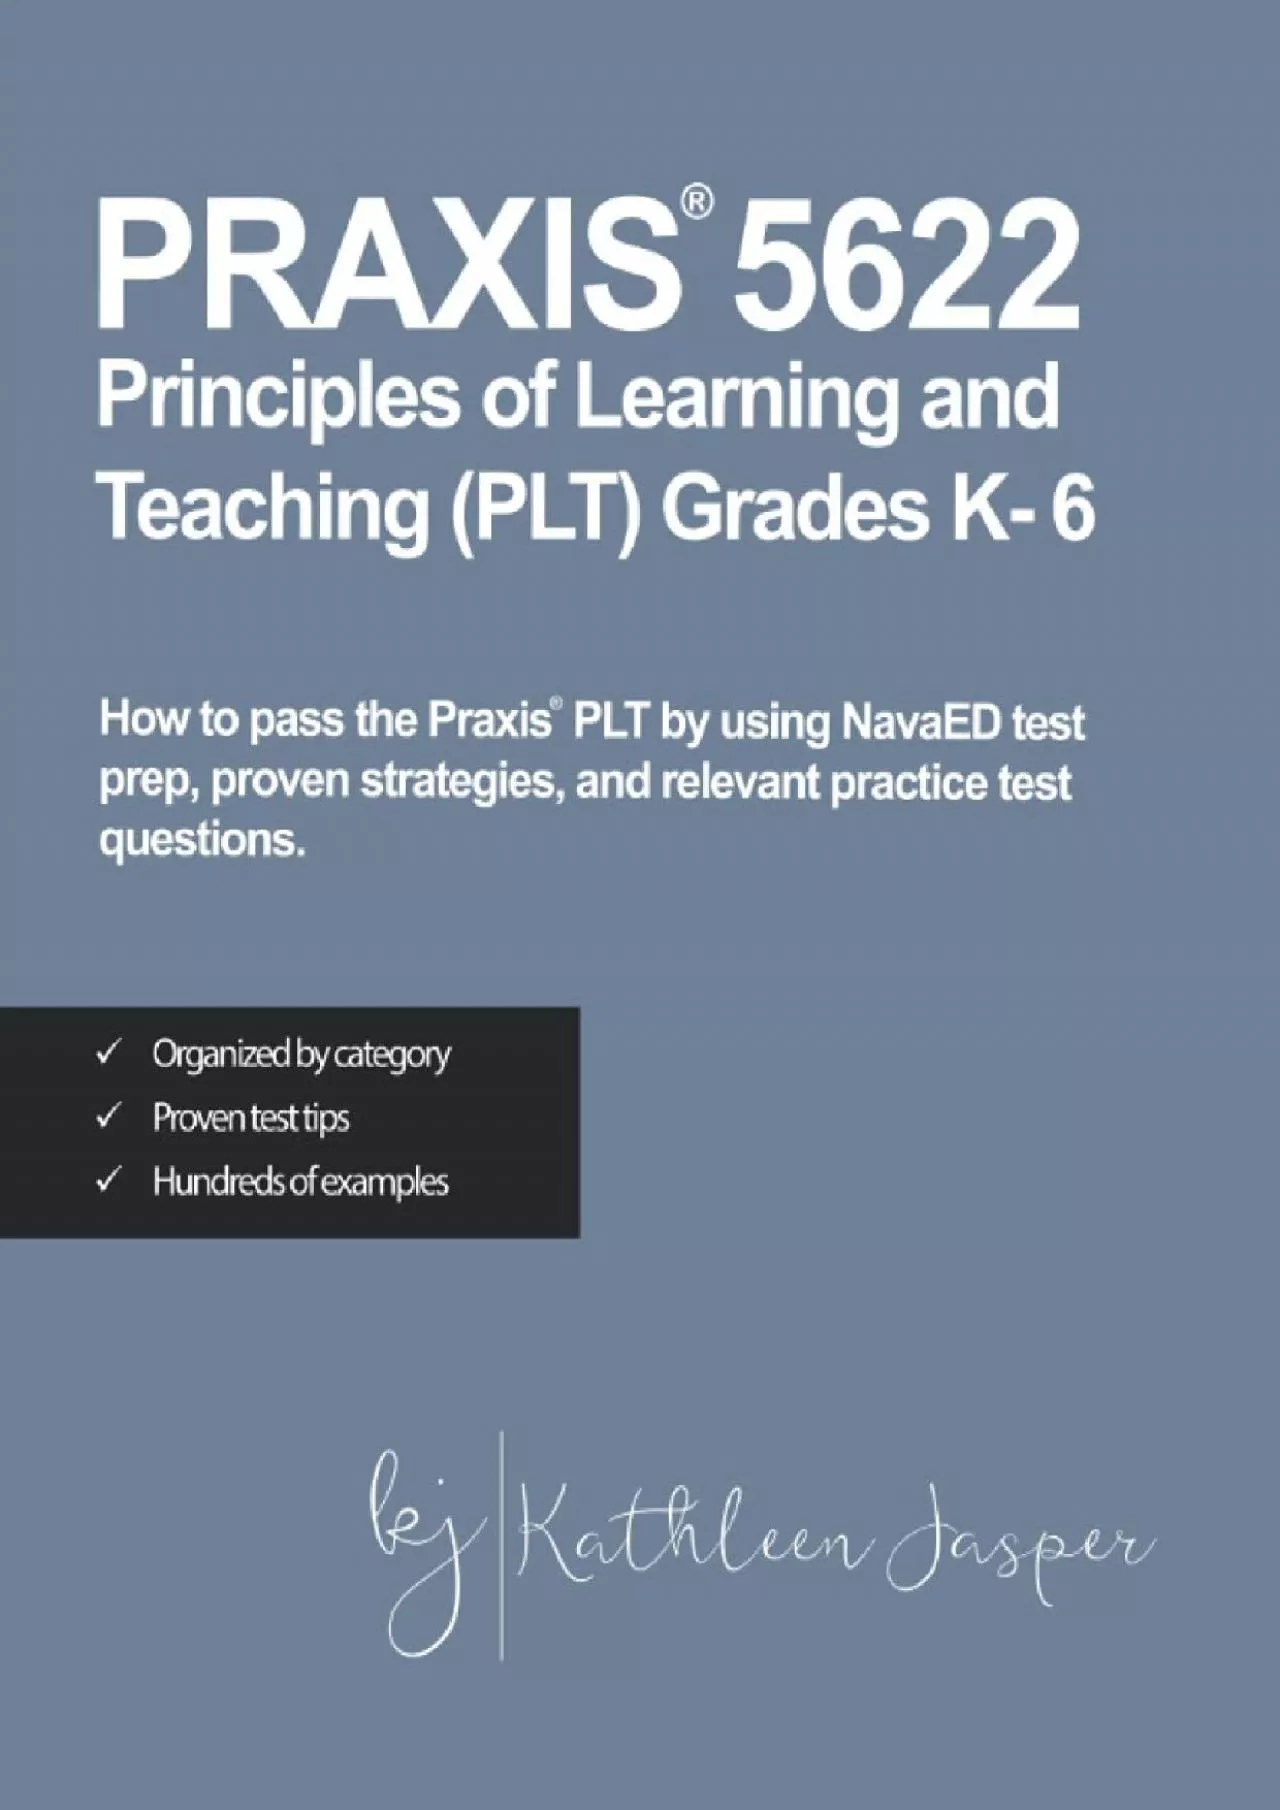 [EBOOK] Praxis® 5622 Principles of Learning and Teaching PLT Grades K-6: How to pass